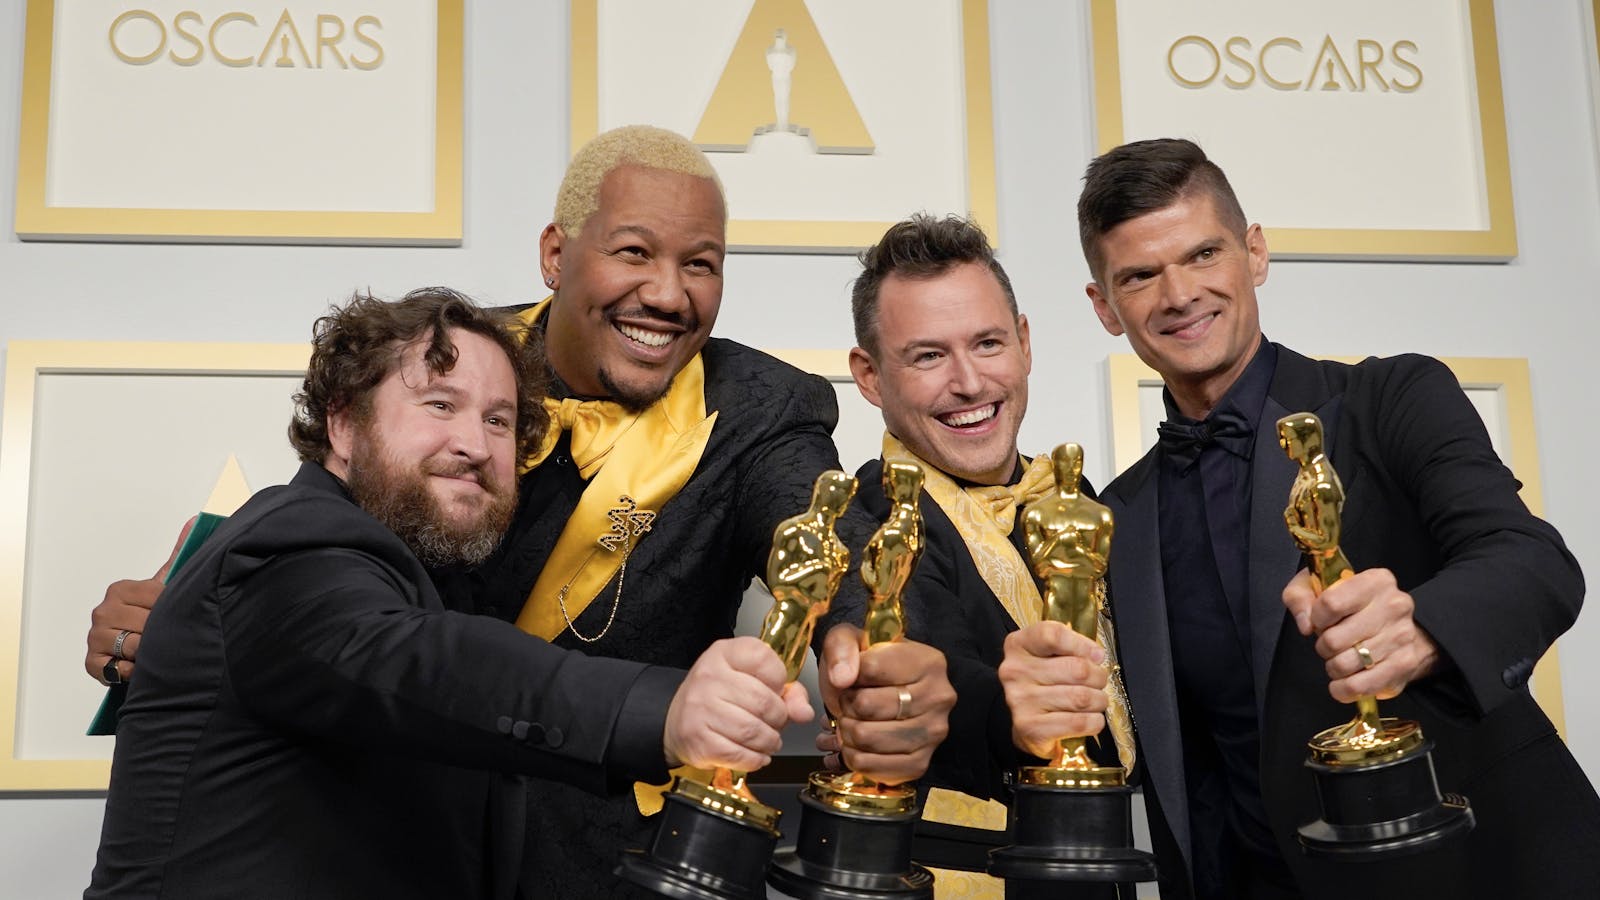 Producers of Group Nine's short film "Two Distant Strangers" at the Oscars. Photo by AP.